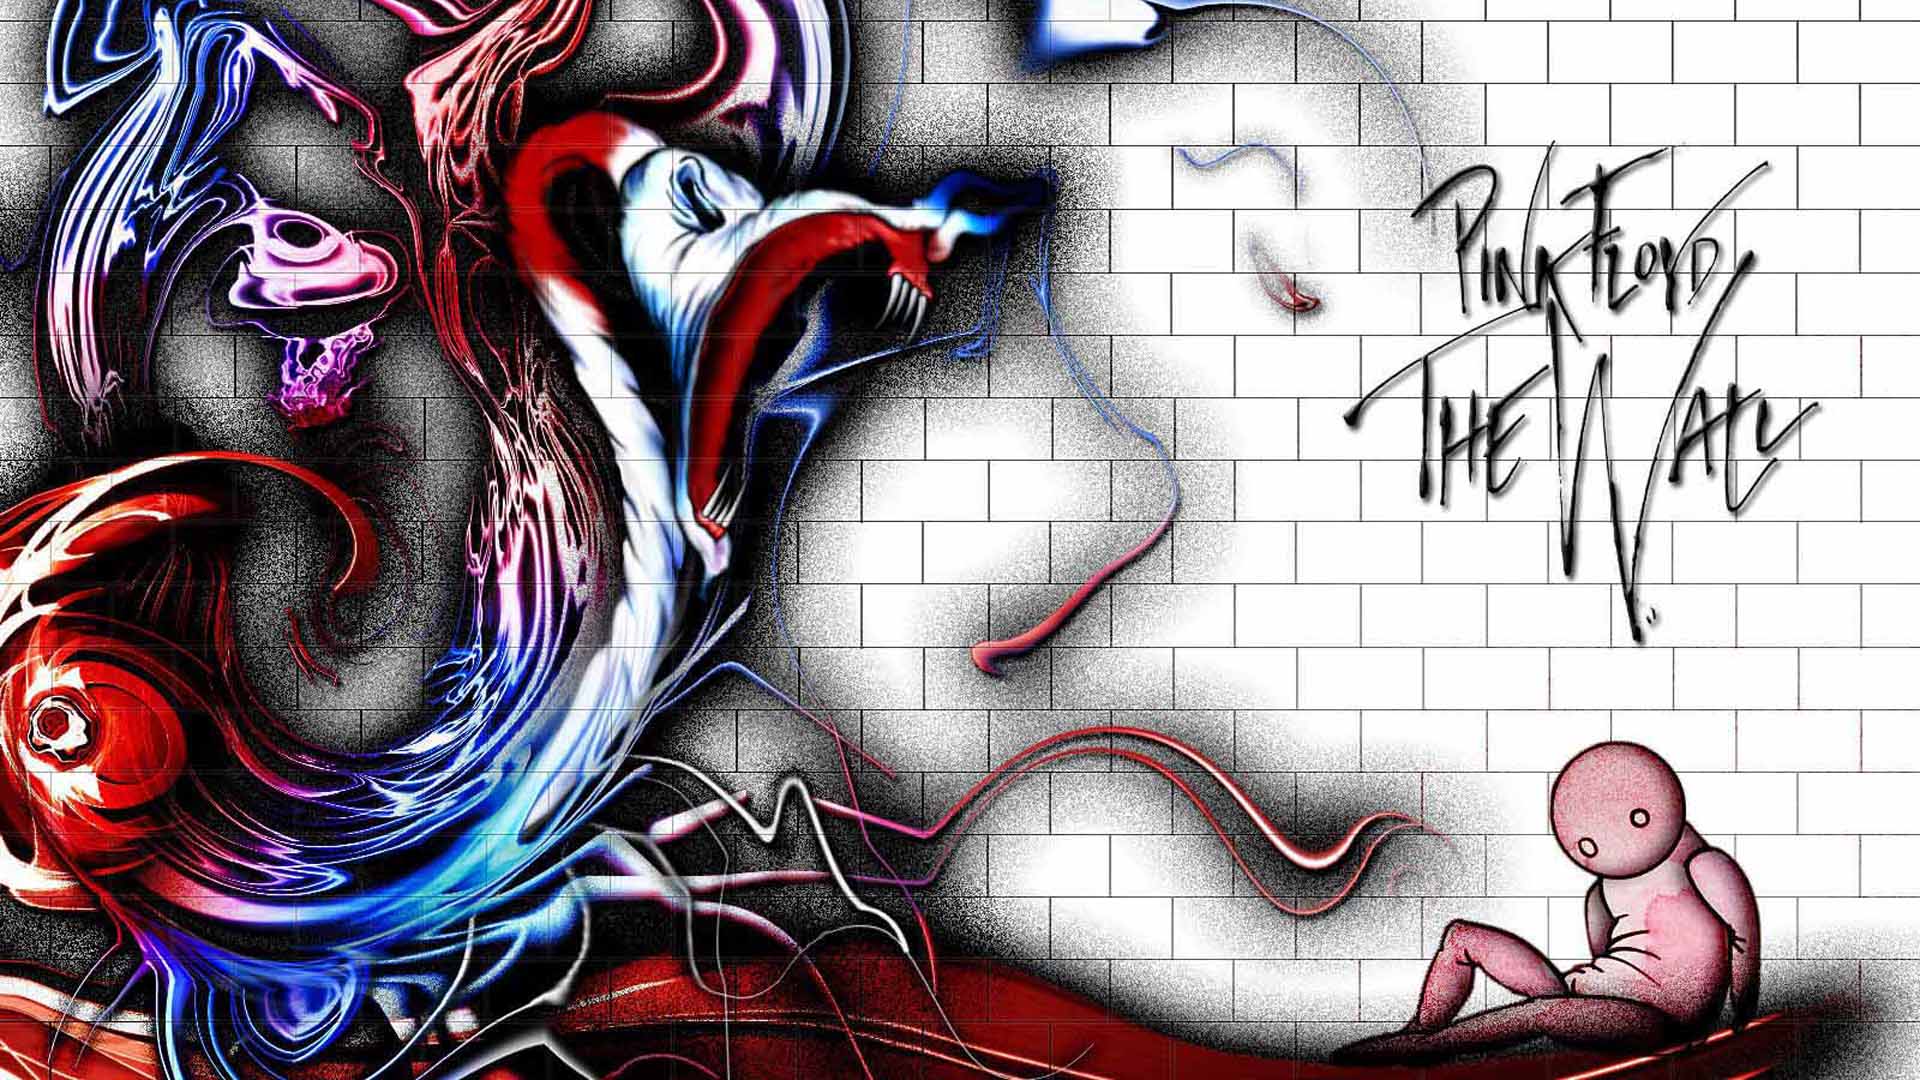 Pink Floyd The Wall Wallpaper by AboveAllHeroes on DeviantArt